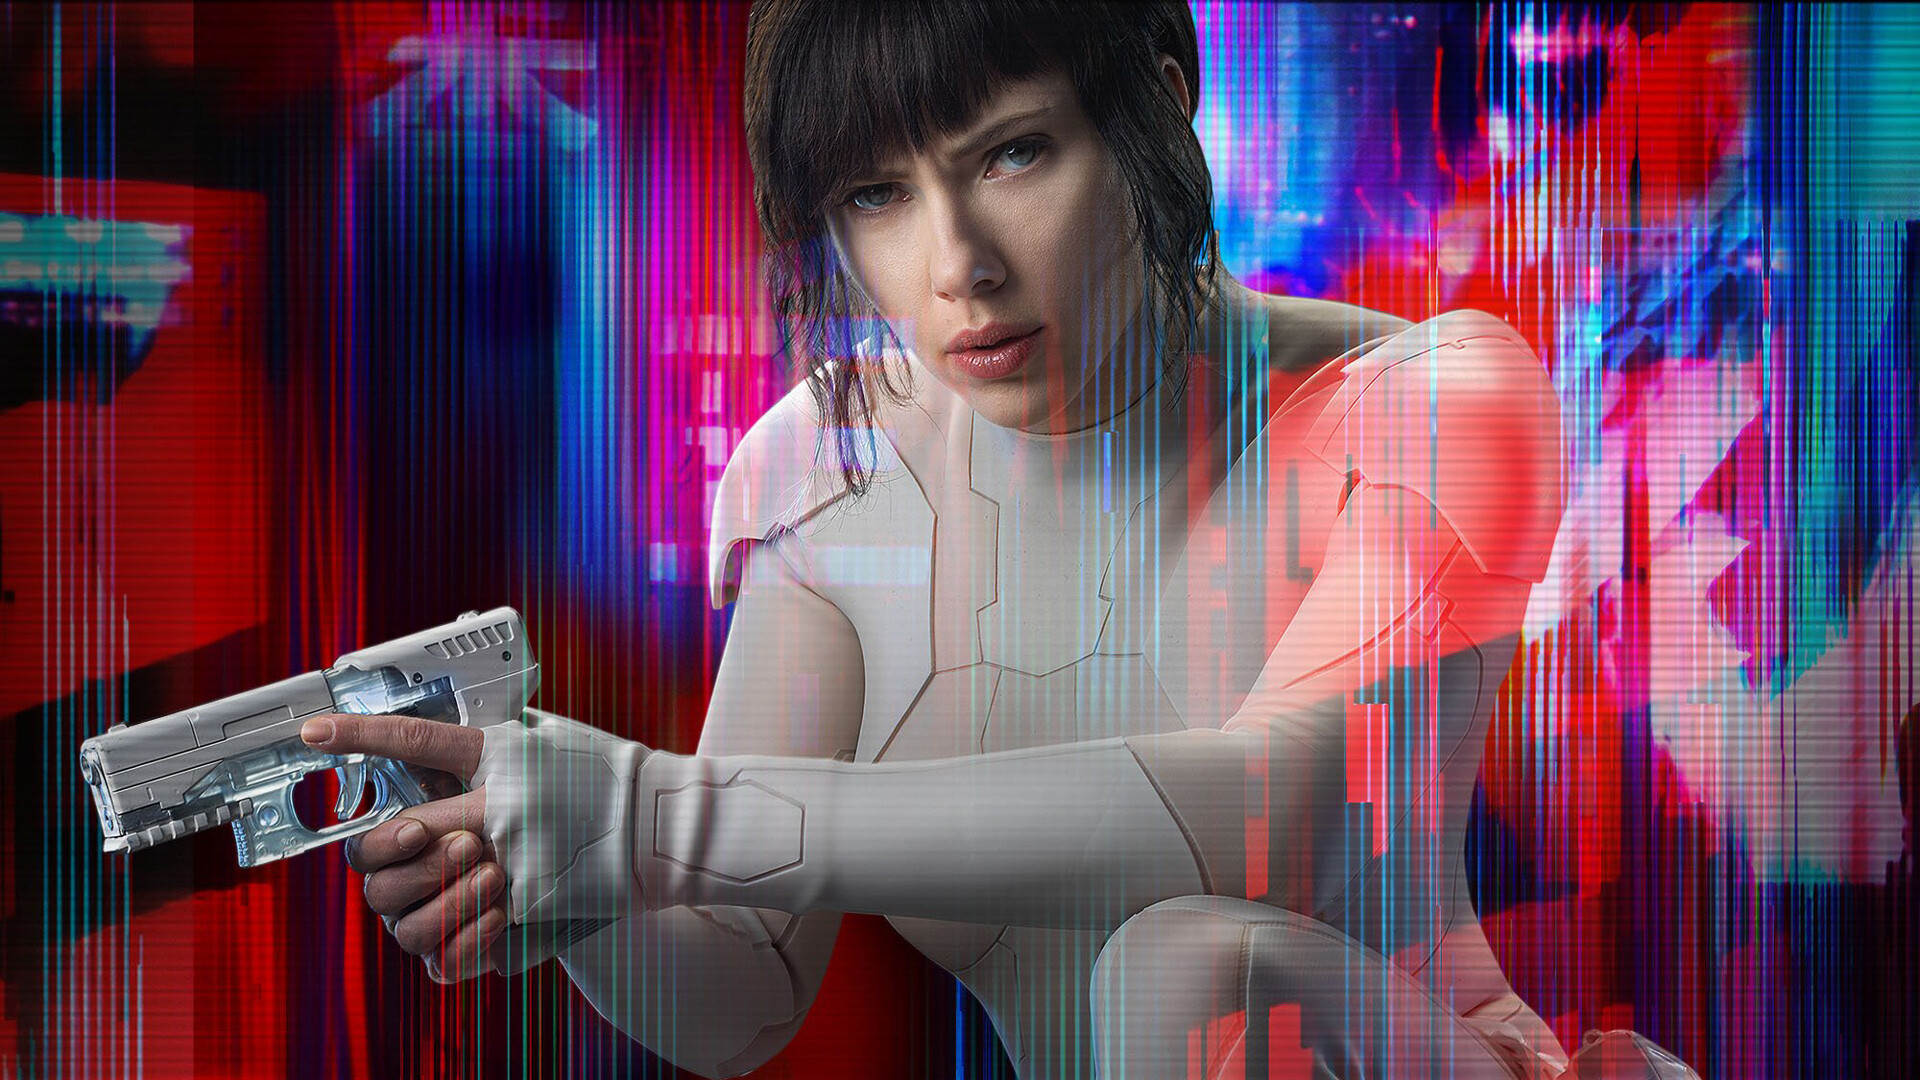 Ghost in the Shell (Movie): Scarlett Johansson in an American science fiction film that premiered in Tokyo on March 16, 2017. 1920x1080 Full HD Wallpaper.